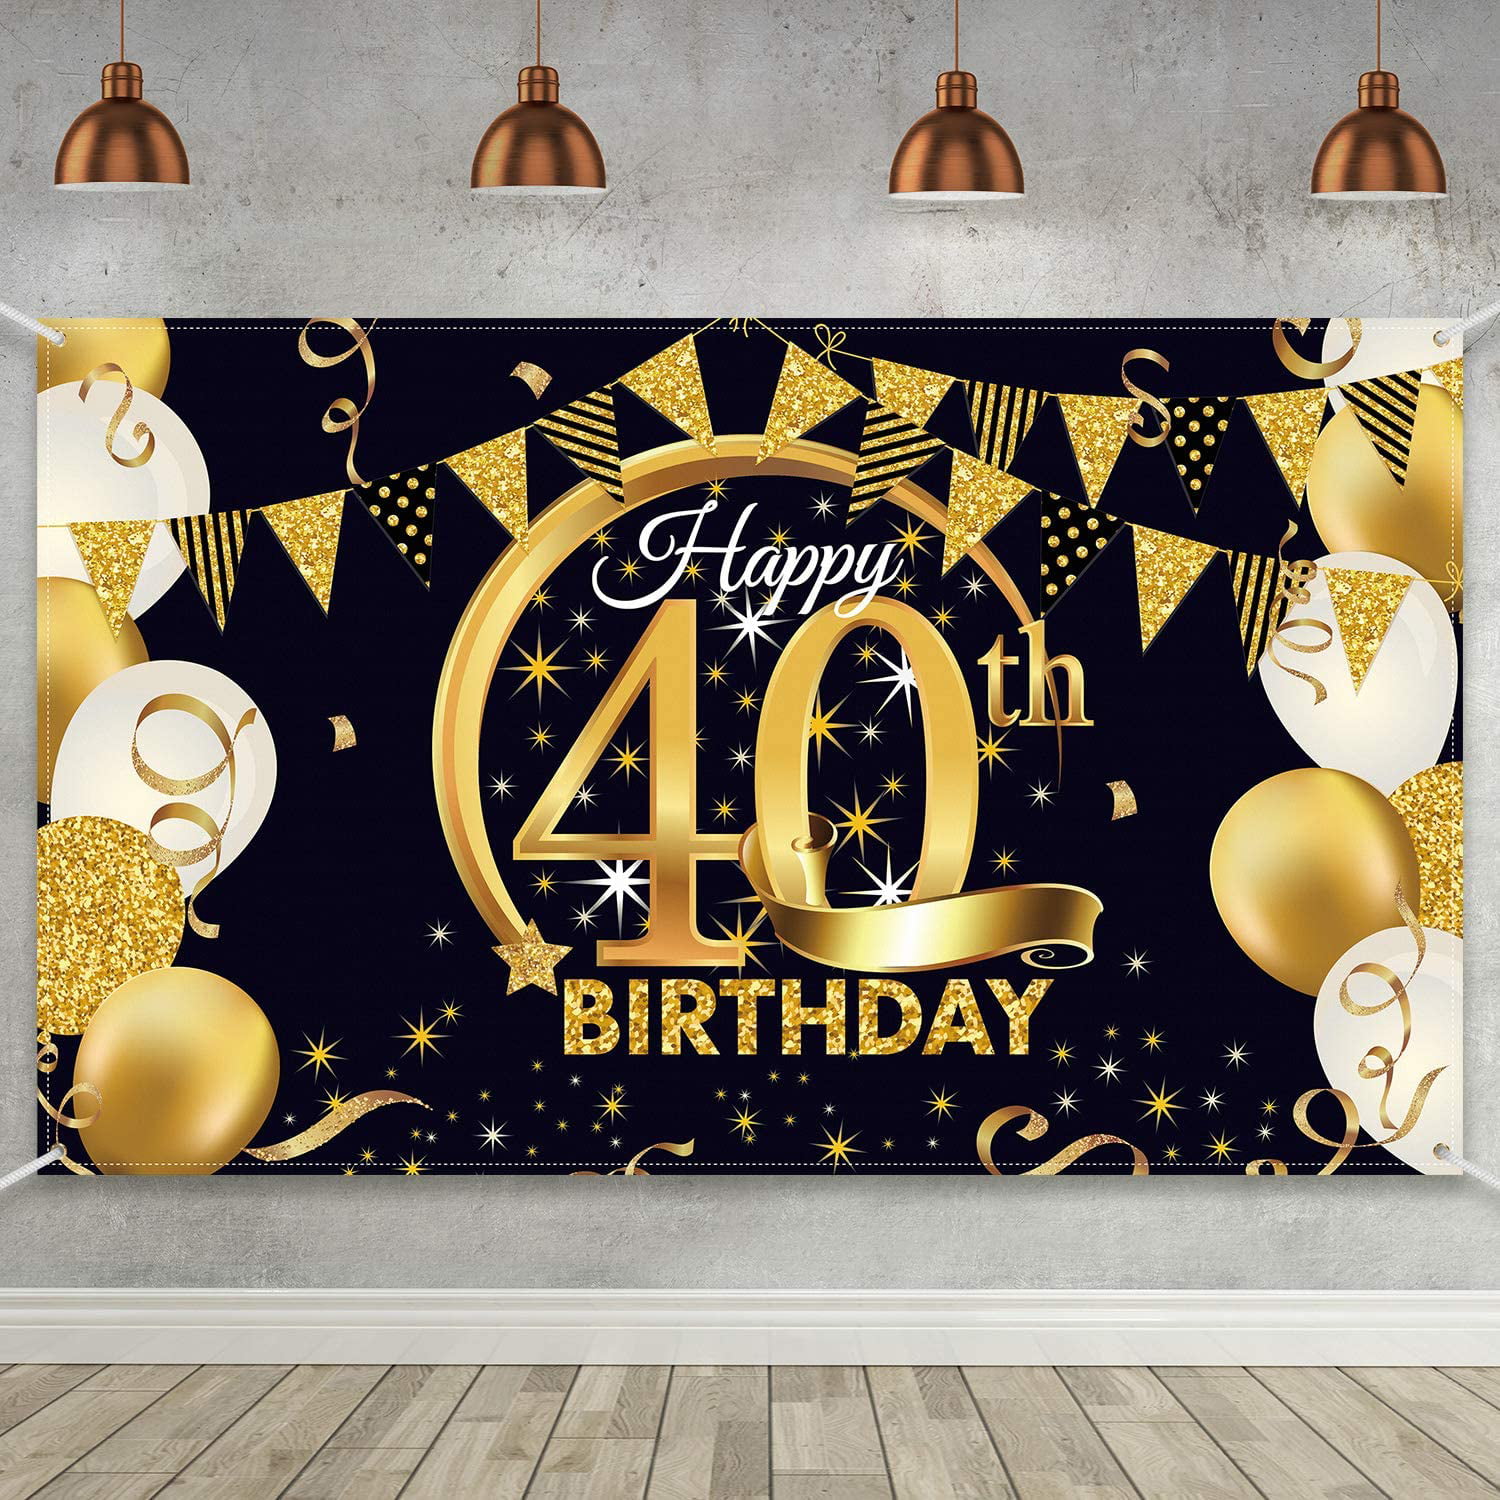 40th Birthday Party Decorations Happy 40th Birthday Banner for 40 Years Old Birthday Party Supplies,Party Decorations for 40th Birthday（Black Gold Glitter）